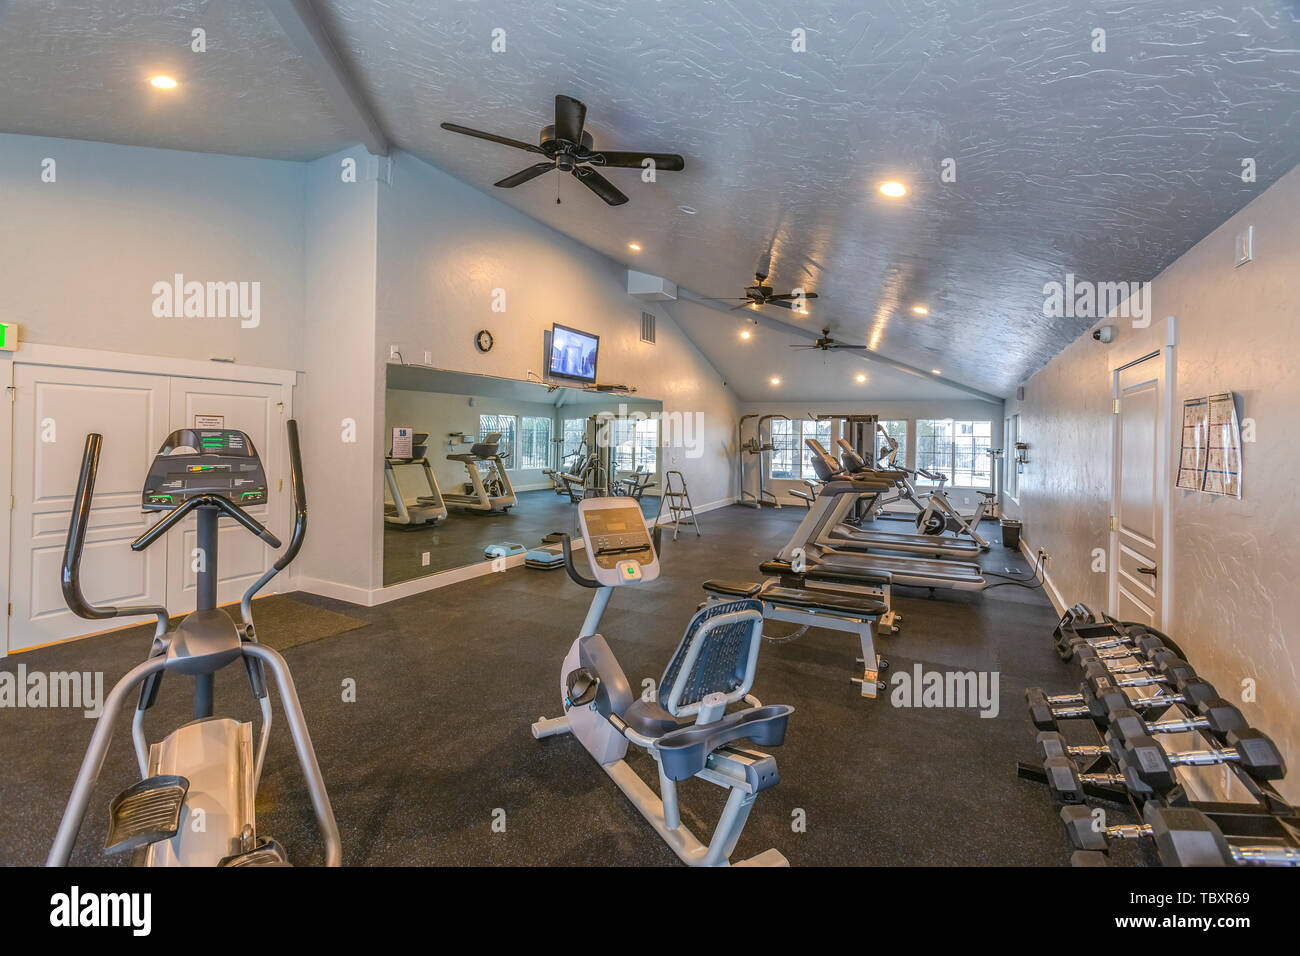 Interior of a spacious fitness gym with various exercise equipment Stock Photo